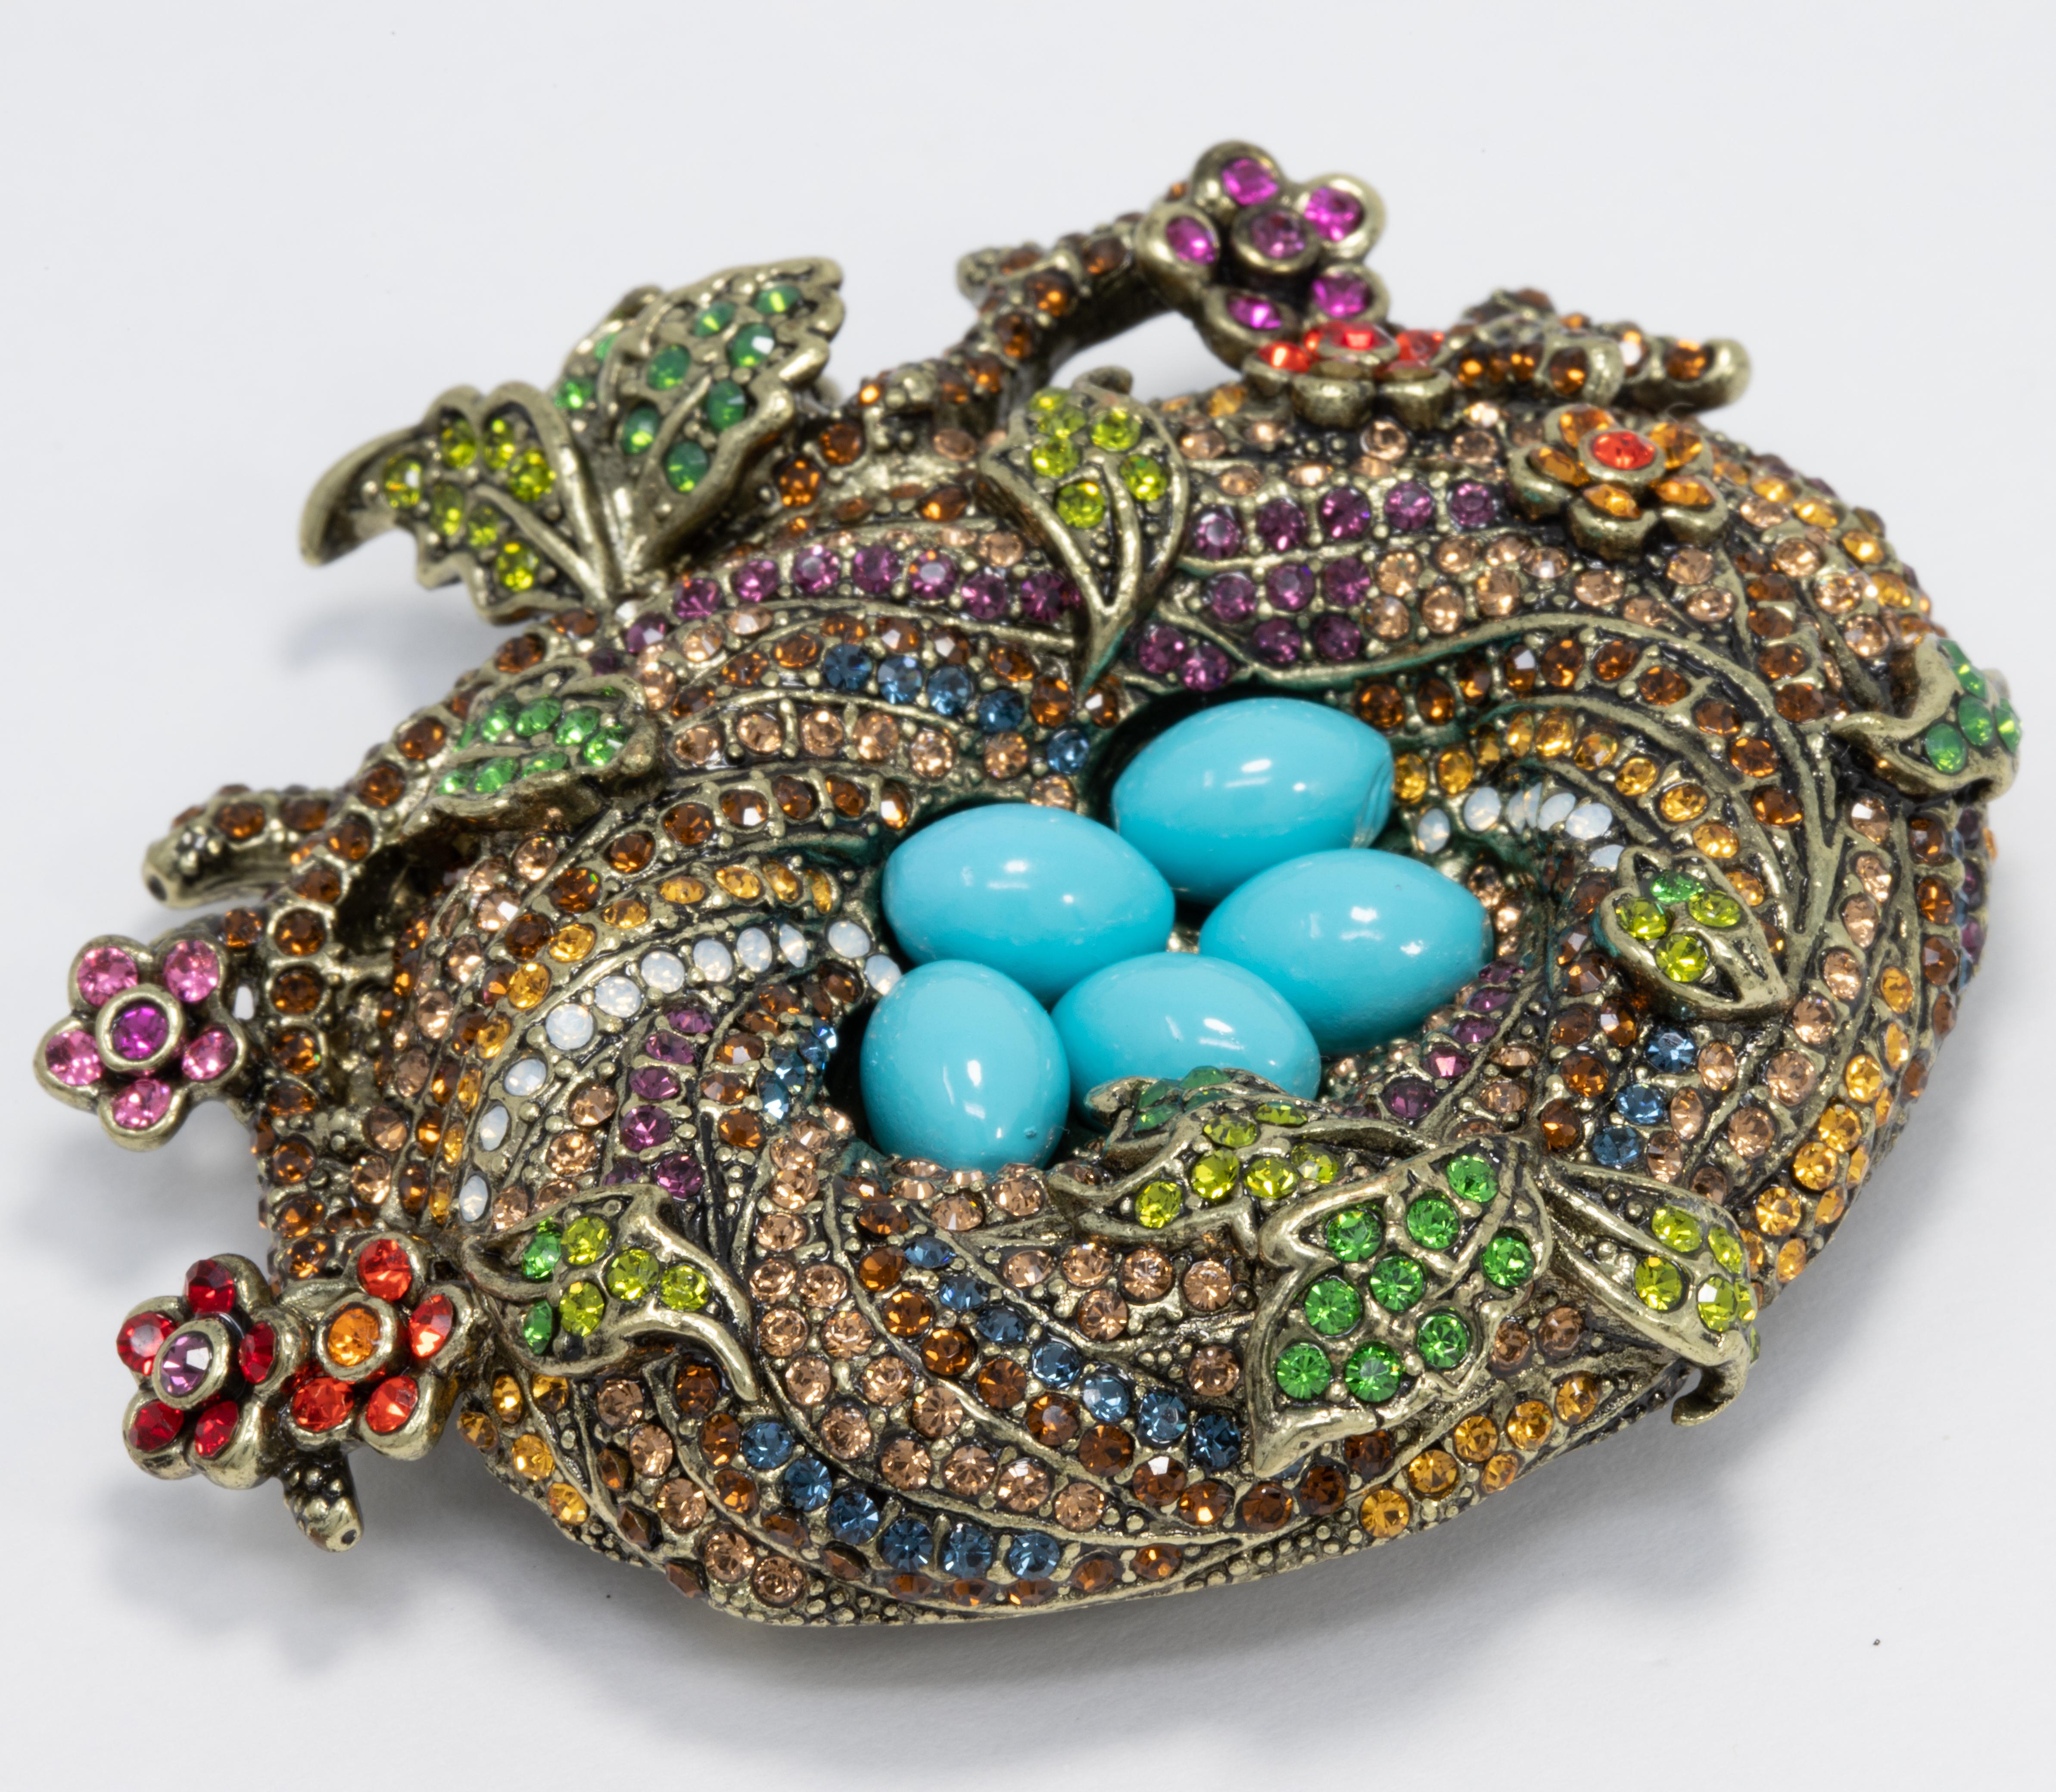 You never have an empty nest, even when you're on your own. Celebrate life, love and family with this beautiful sparkling crystal bird's nest pin from Heidi Daus.

Colorful crystals and faux turquoise cabochons on an exquisite brass-tone